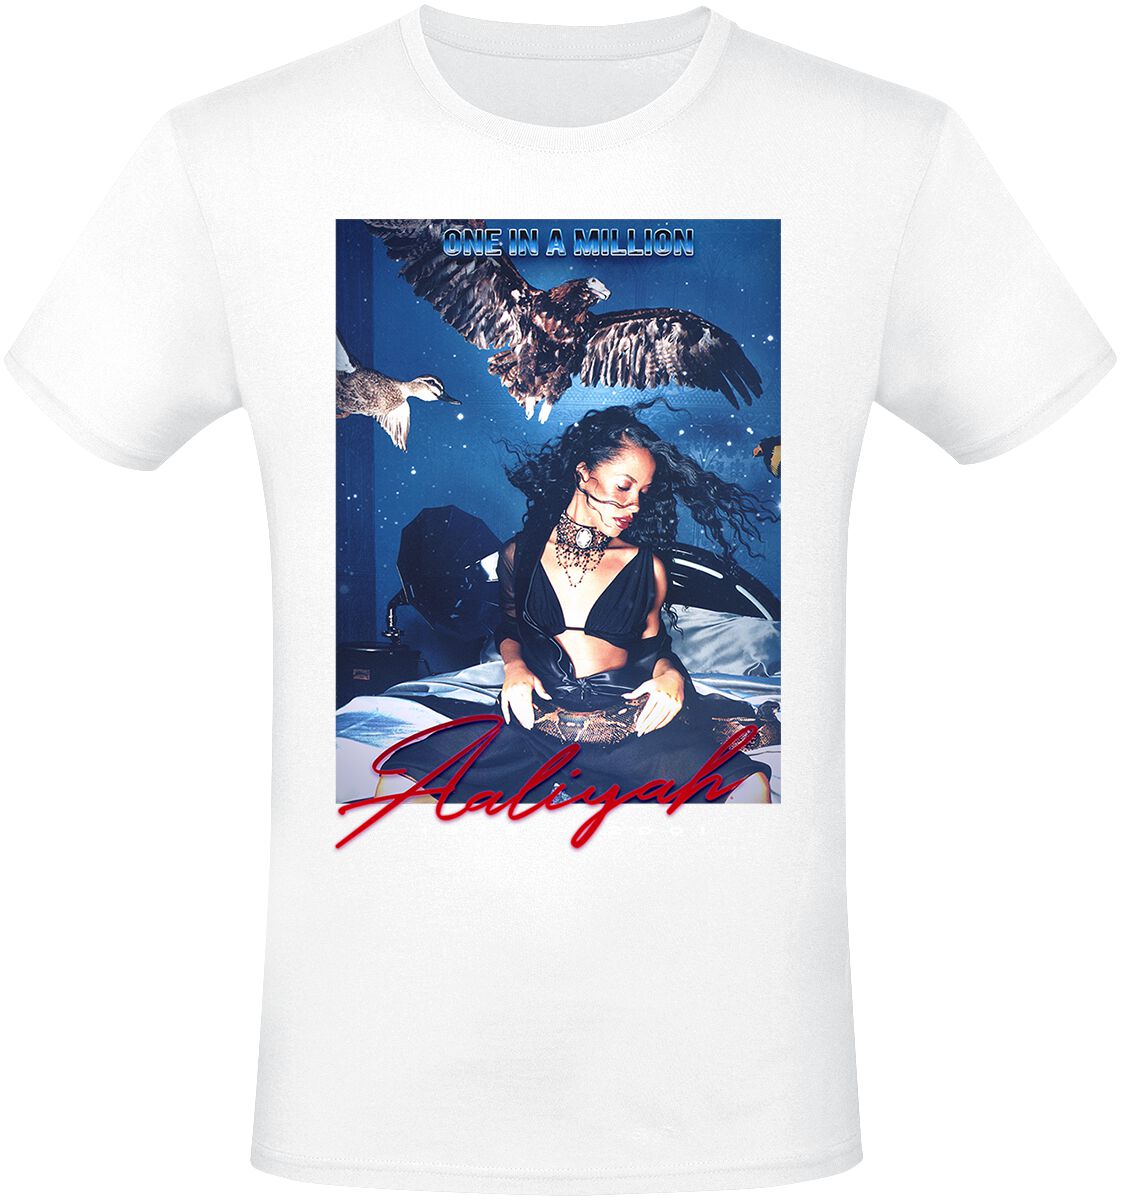 Image of T-Shirt di Aaliyah - One In A Million - S a 3XL - Uomo - bianco